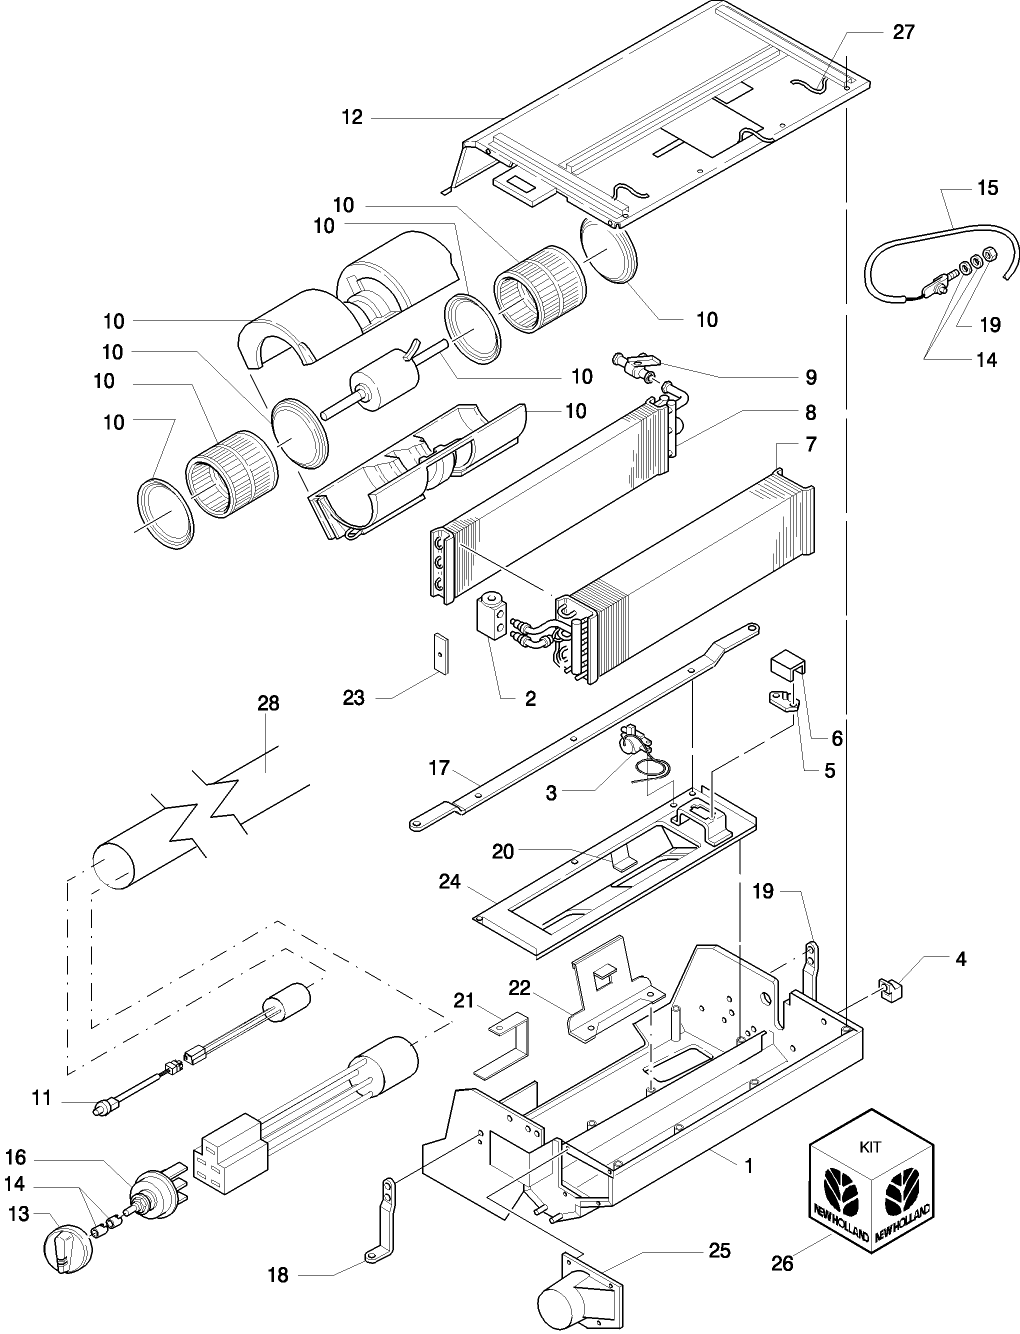 15G01 AC/HEATER ASSEMBLY